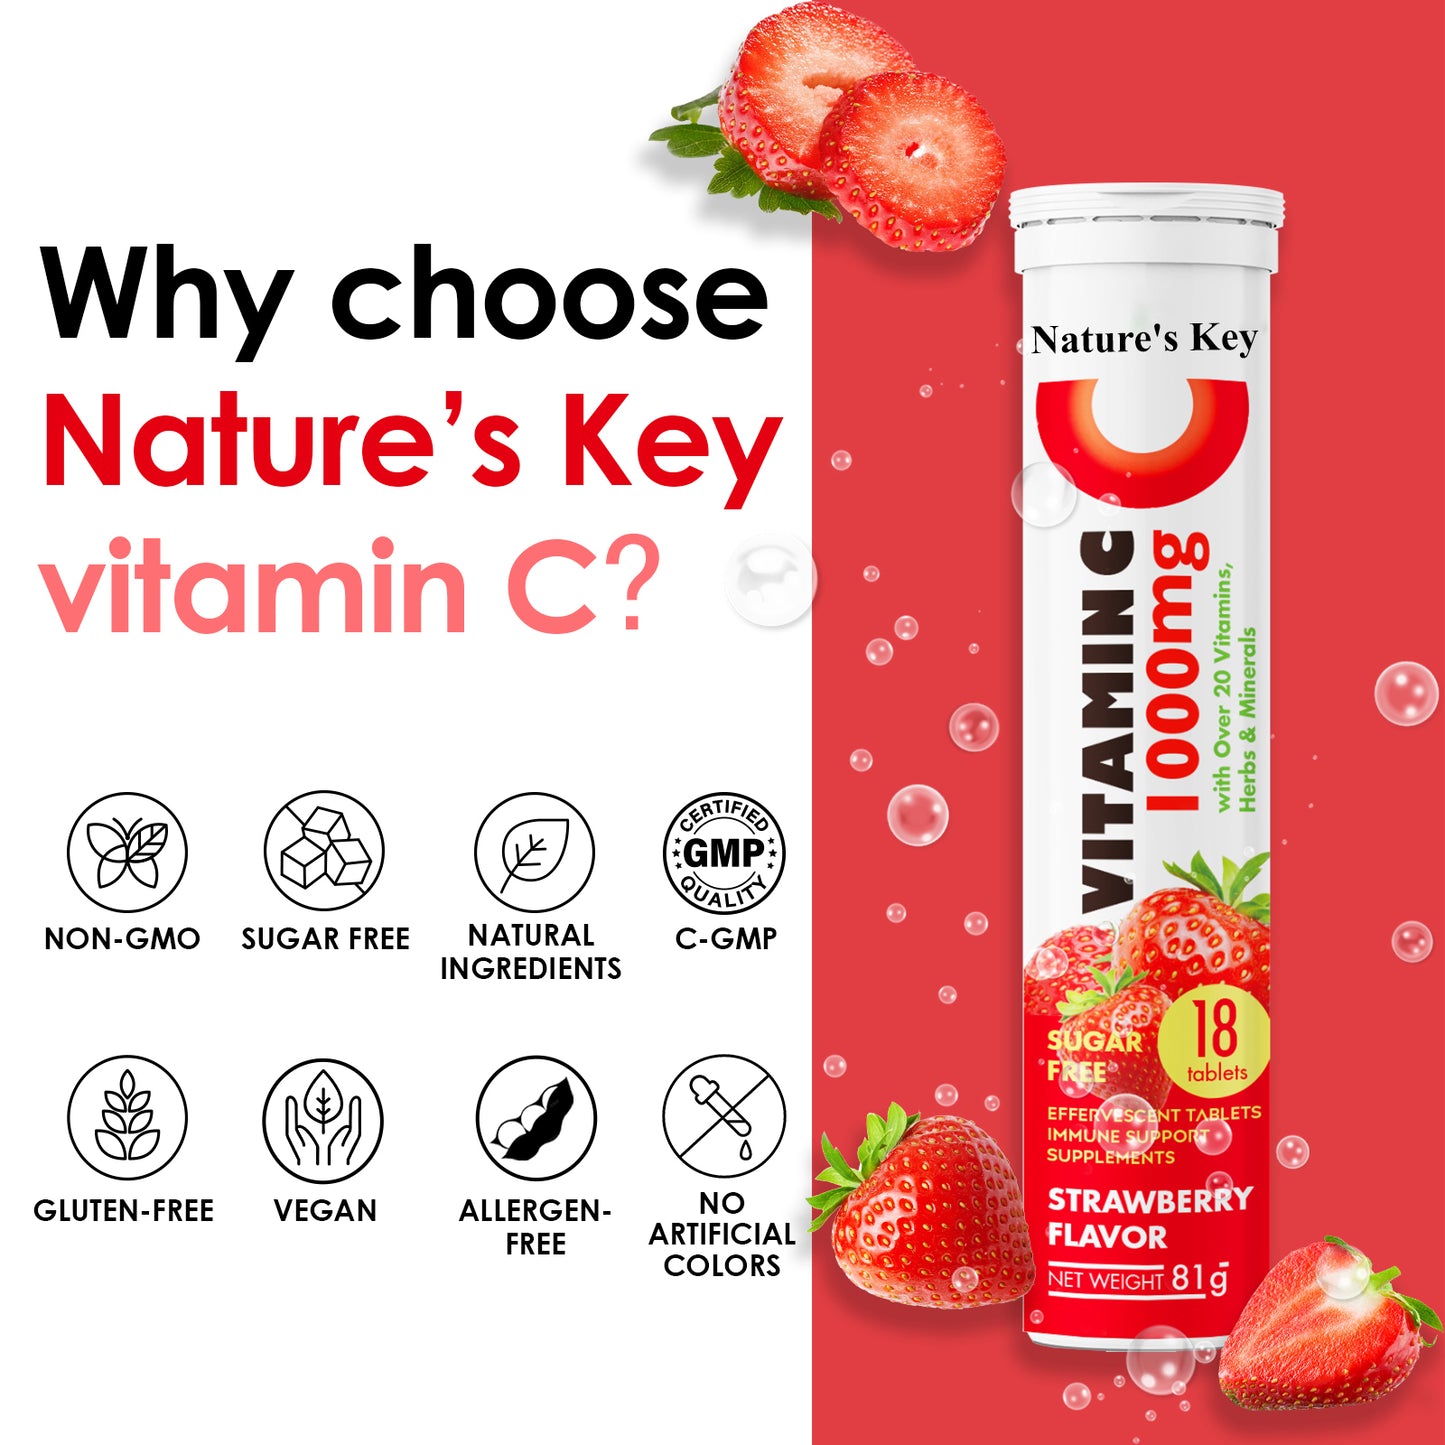 Nature's Key Vitamin C 1000mg with Over 20 Vitamins, Herbs & Minerals Immune Support Effervescent Tablets, Blast of Vitamin A, C, E, Zinc, Selenium, Echinacea & Ginger, Strawberry18 Count